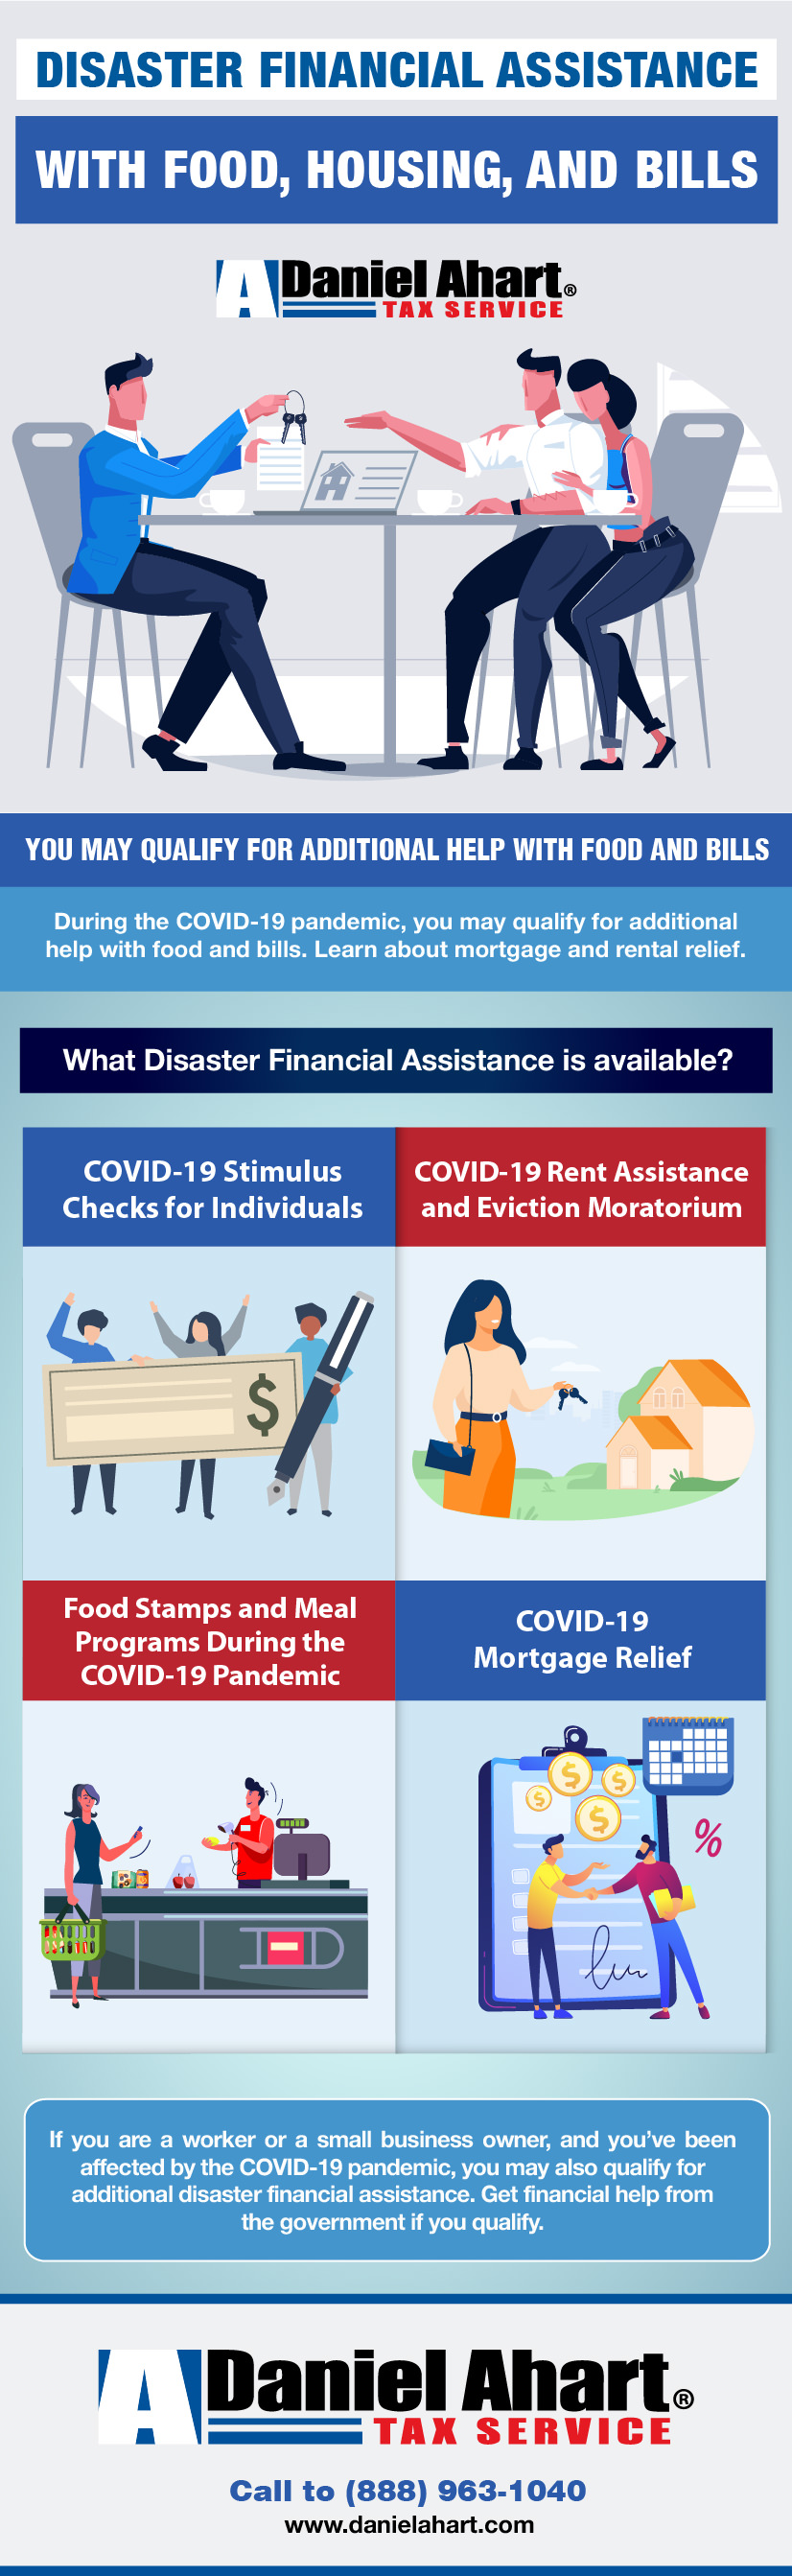 Disaster Financial Assistance with Food, Housing, and Bills - Daniel Ahart